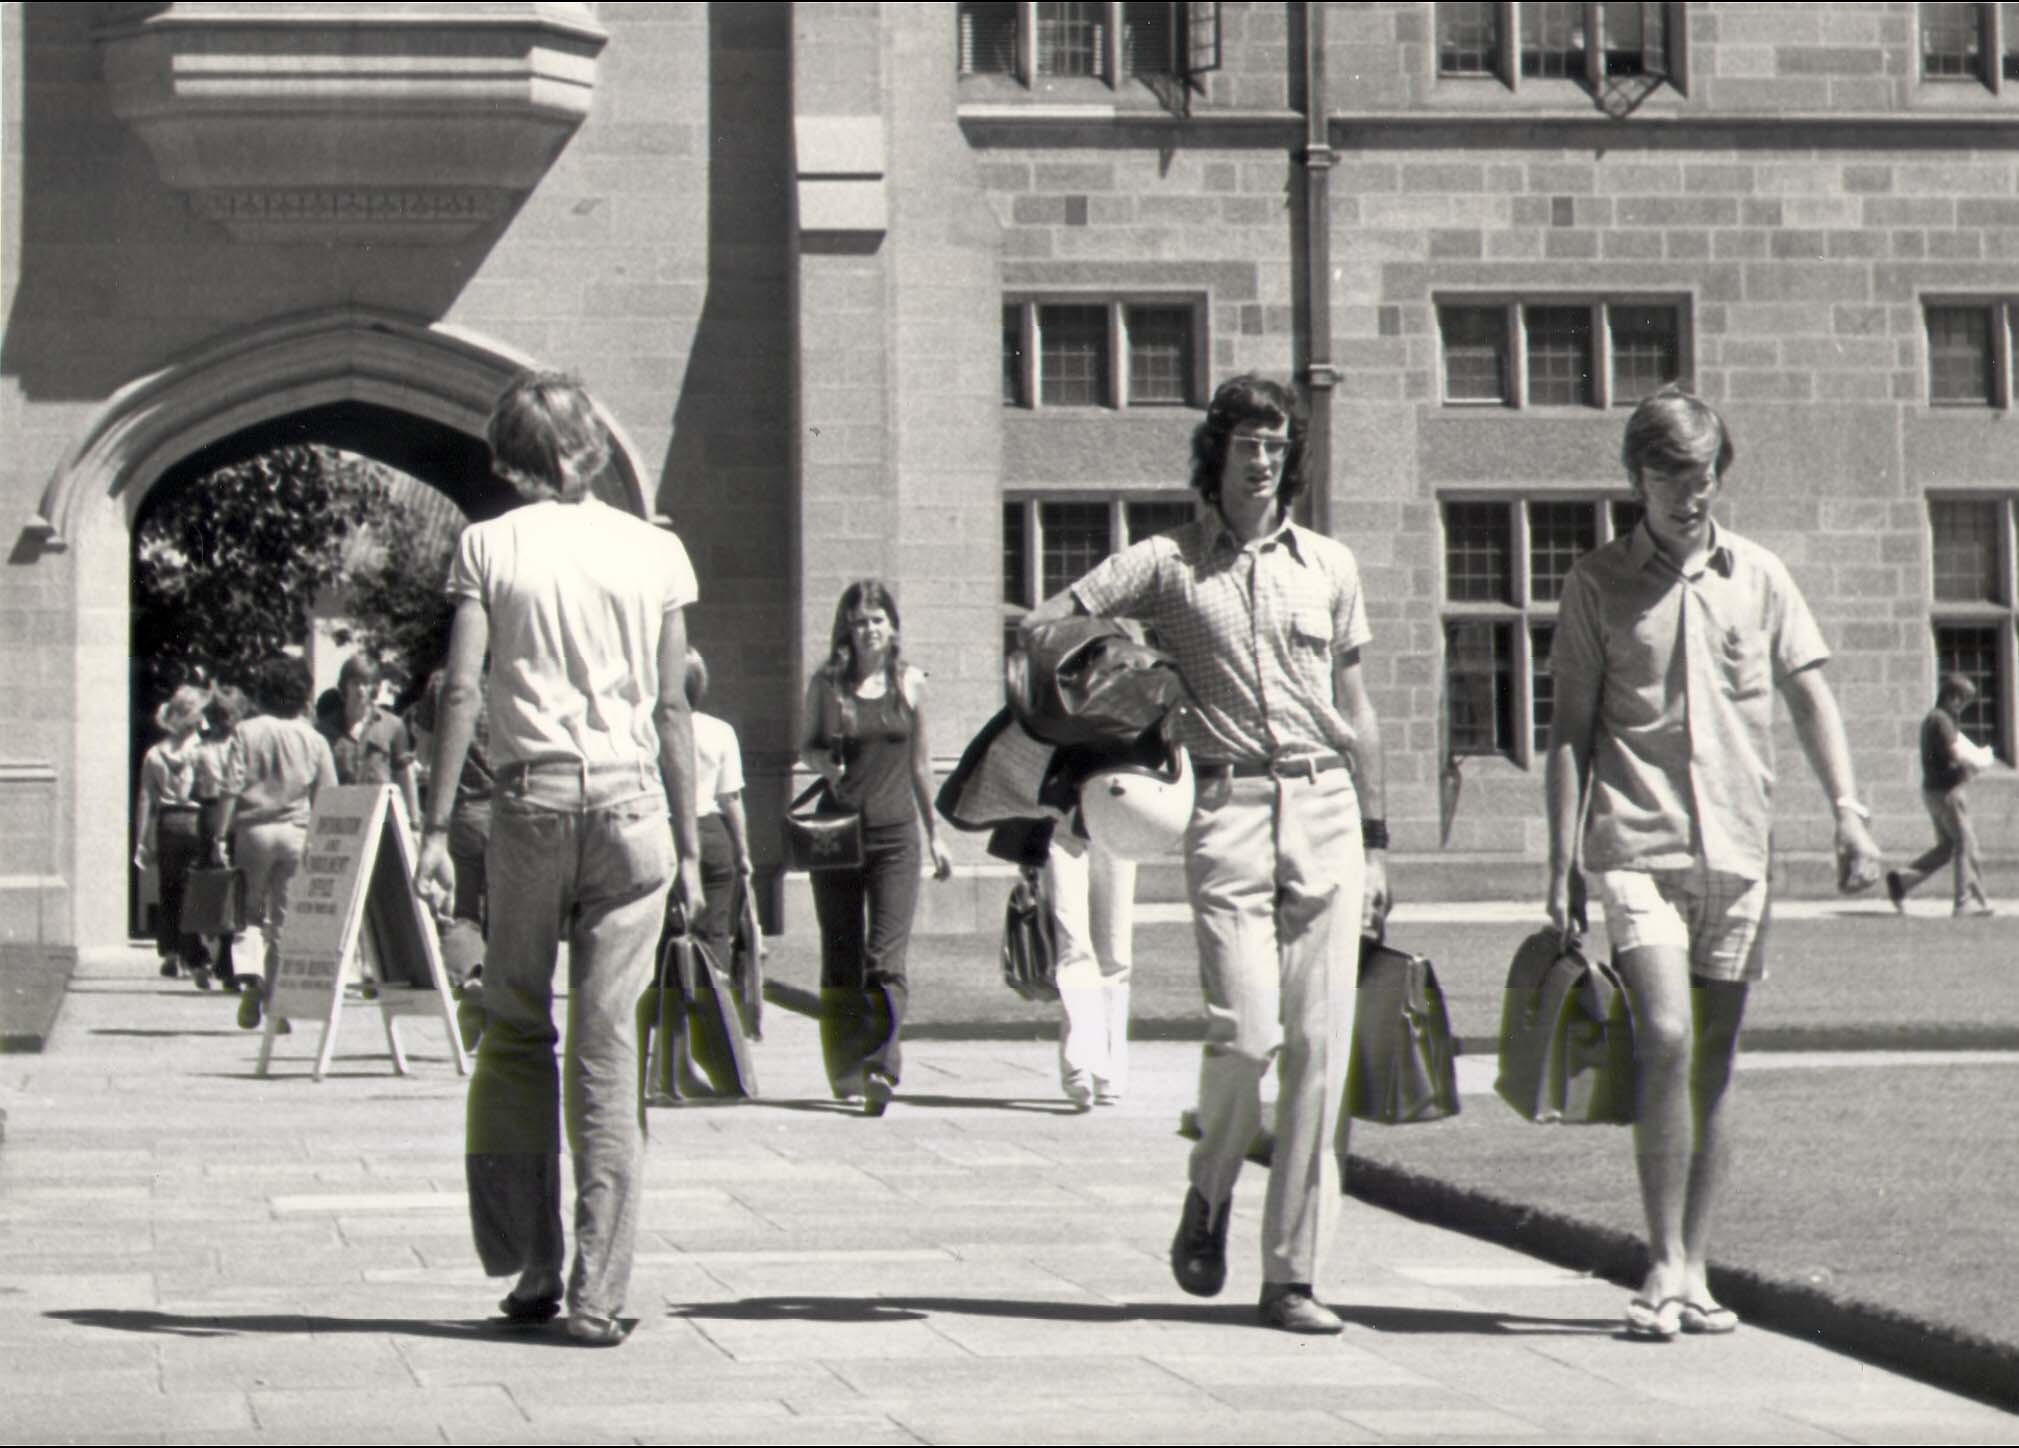 STUDENTS, SHOWING DRESS STYLES